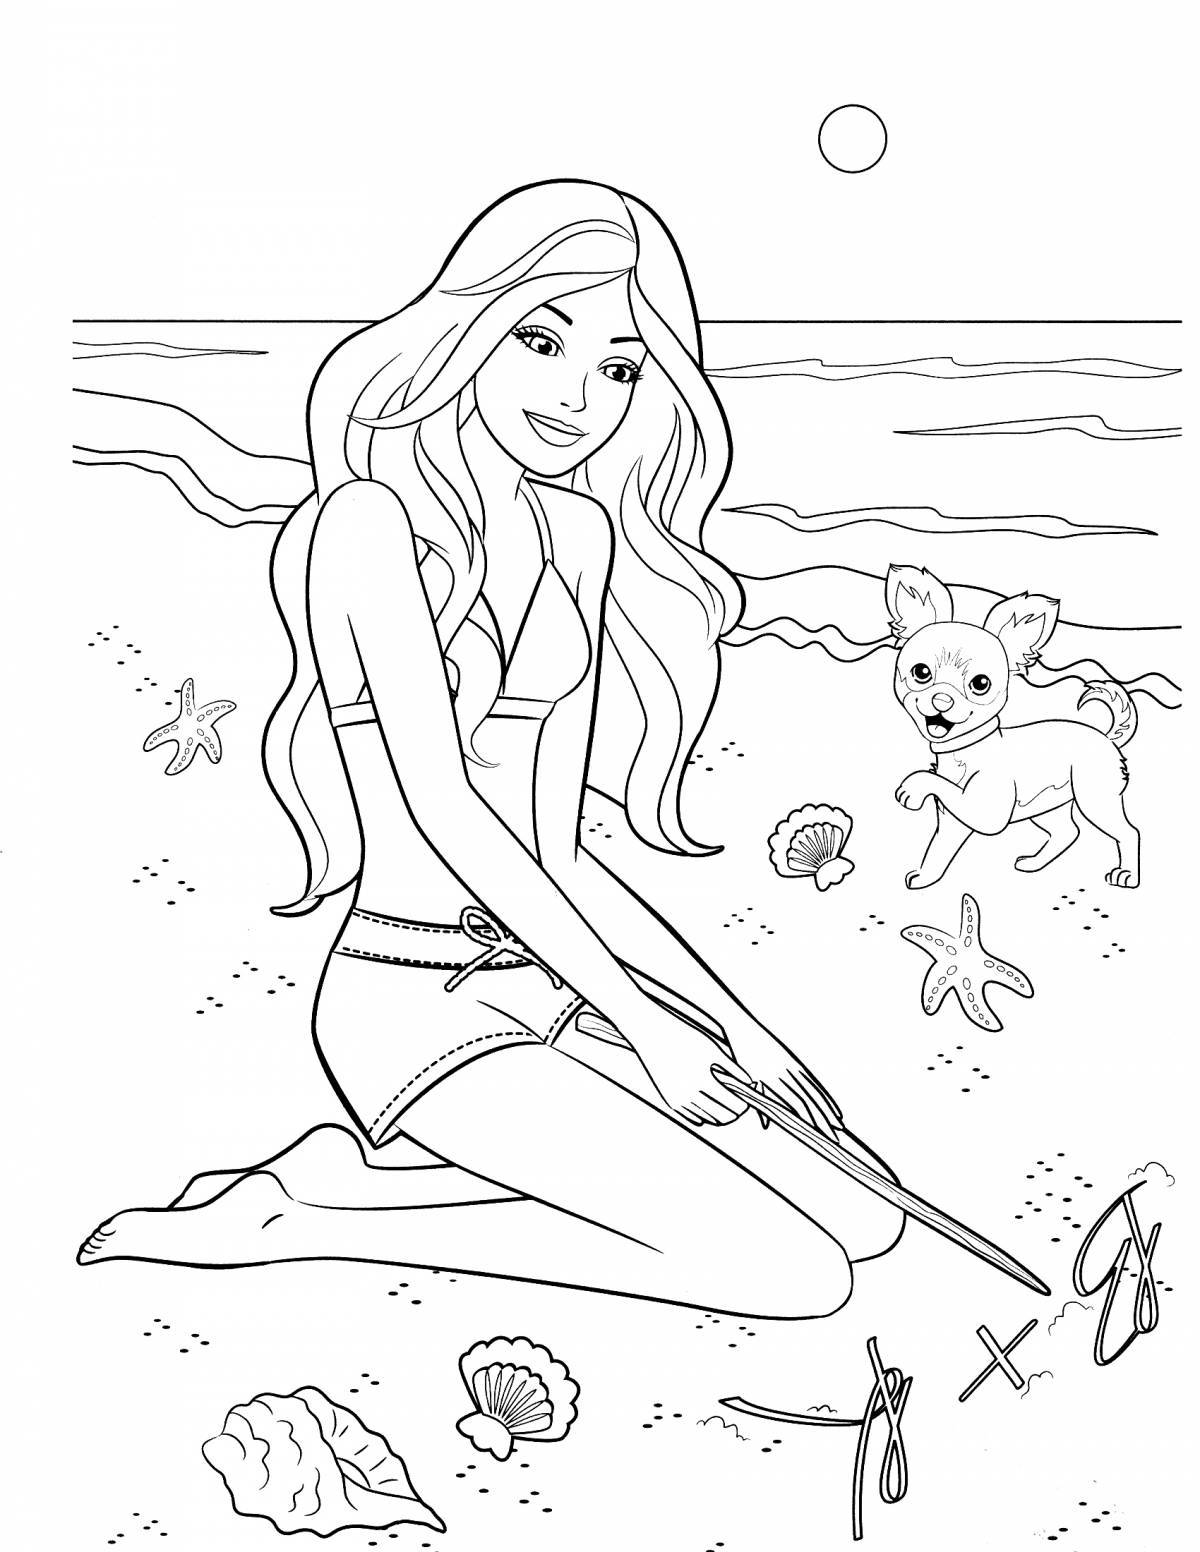 Fancy barbie coloring book for kids